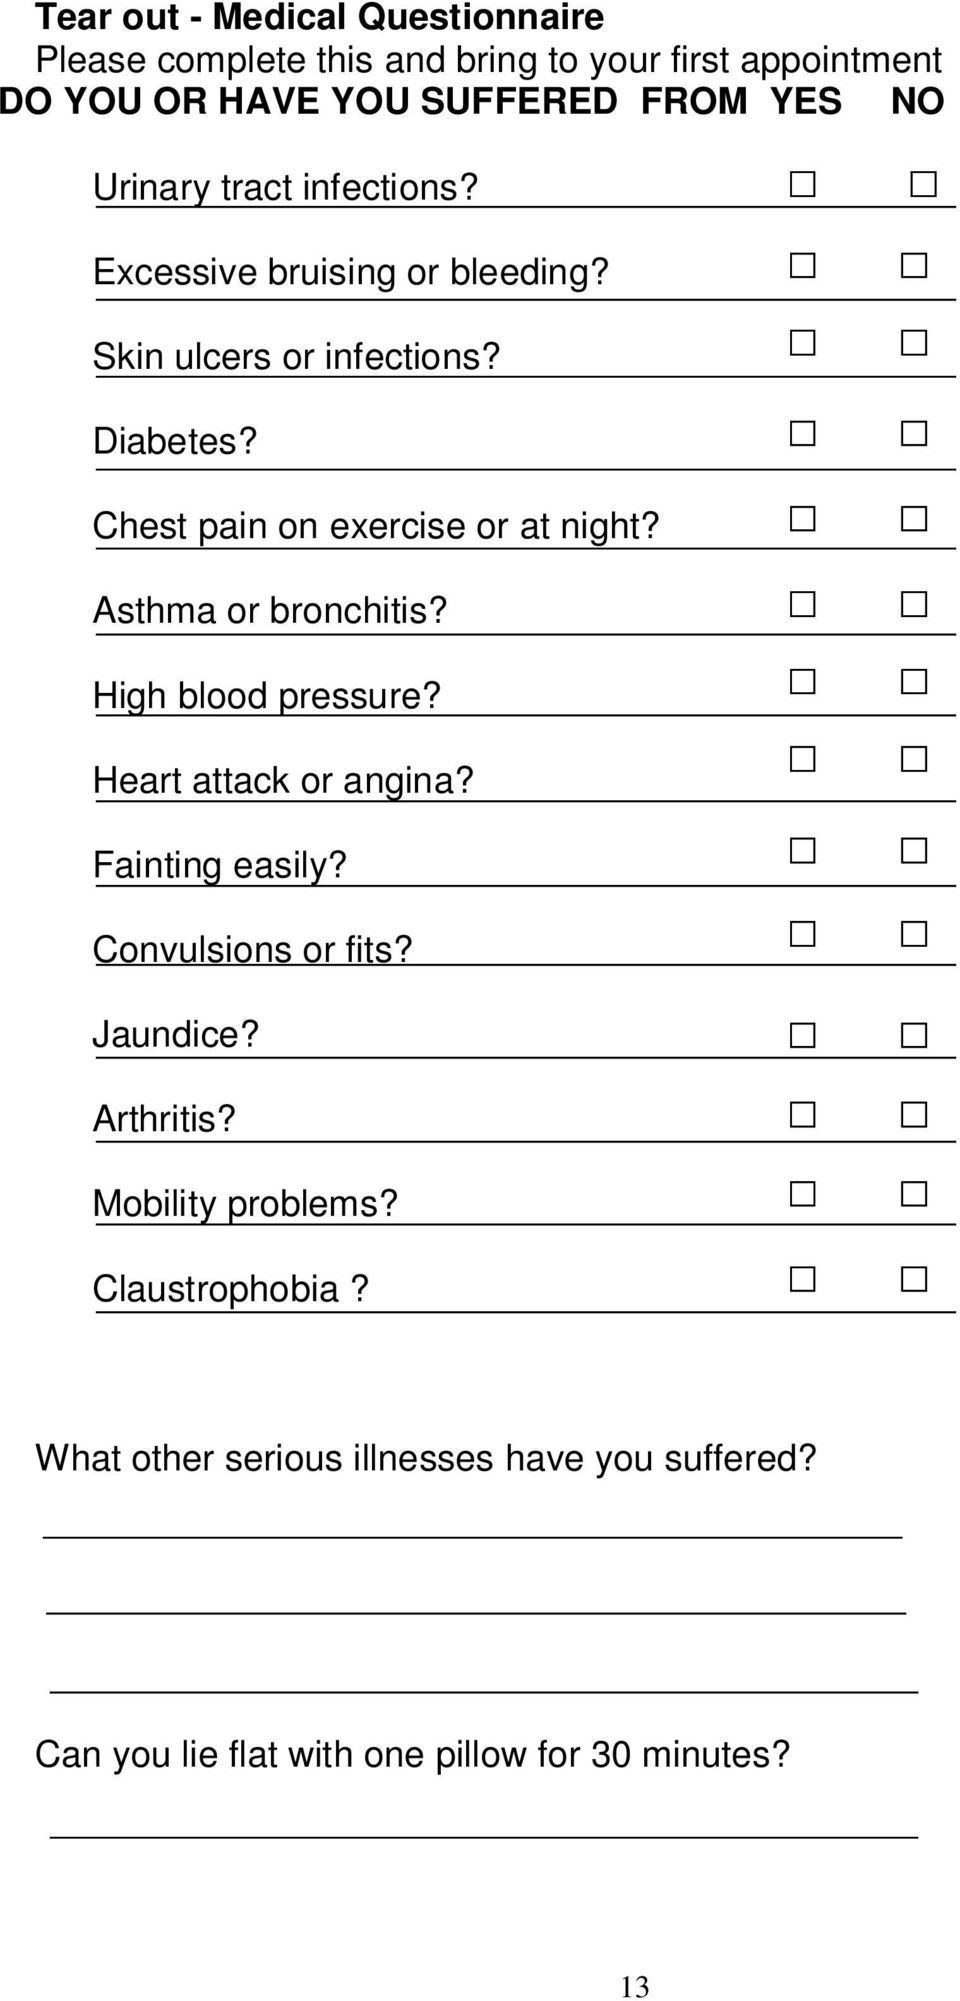 Asthma or bronchitis? High blood pressure? Heart attack or angina? Fainting easily? Convulsions or fits? Jaundice? Arthritis?